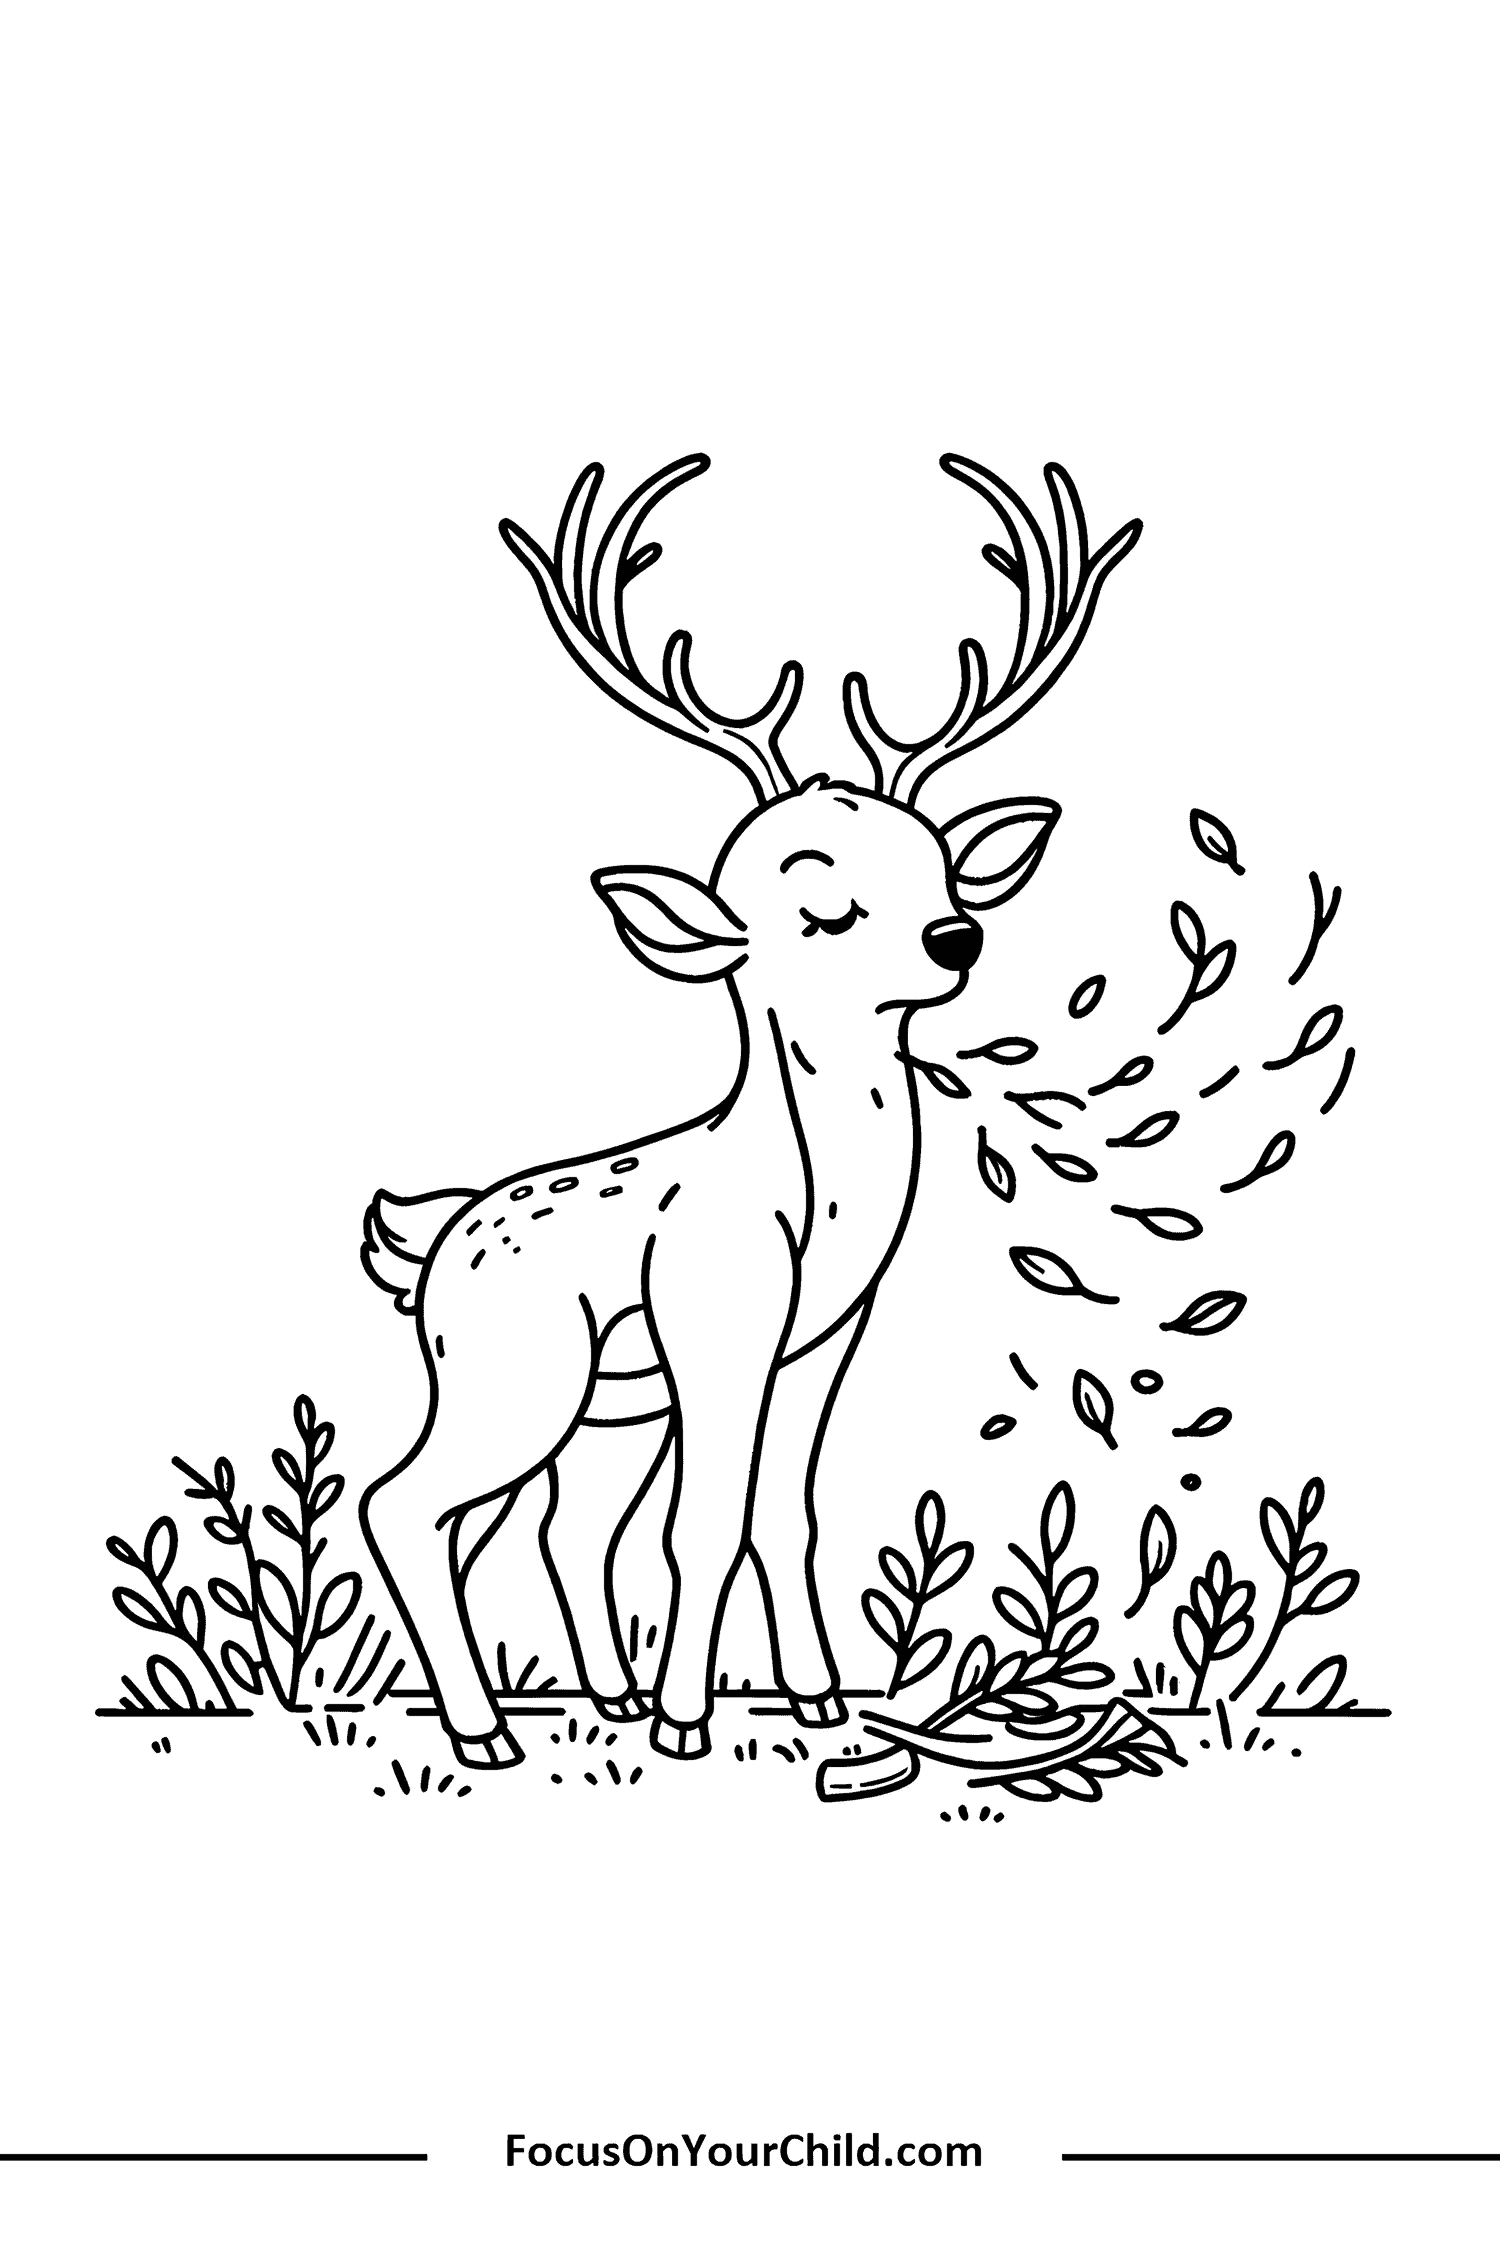 Tranquil deer in natural meadow setting, perfect for childrens coloring activities.